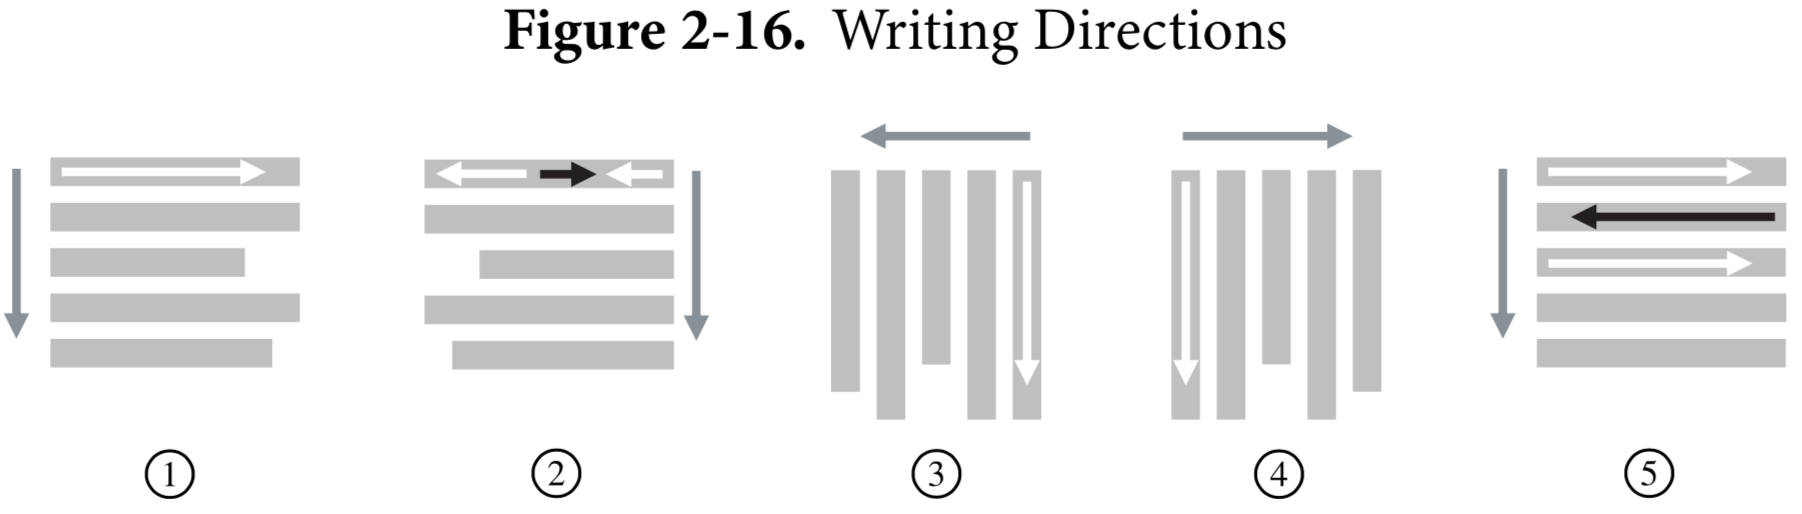 Writing Directions